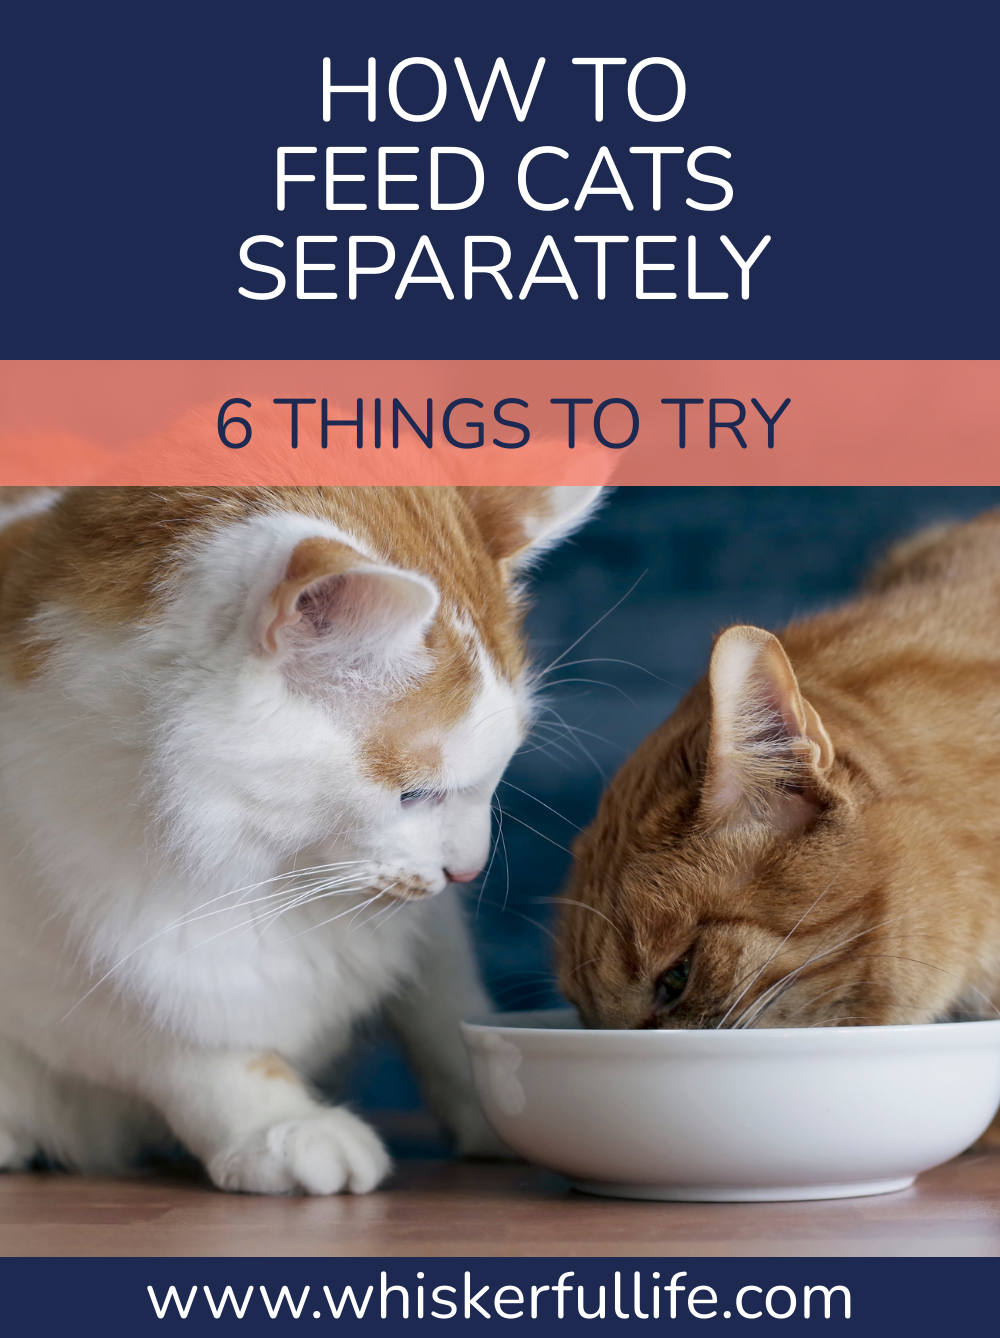 How To Feed Cats Separately